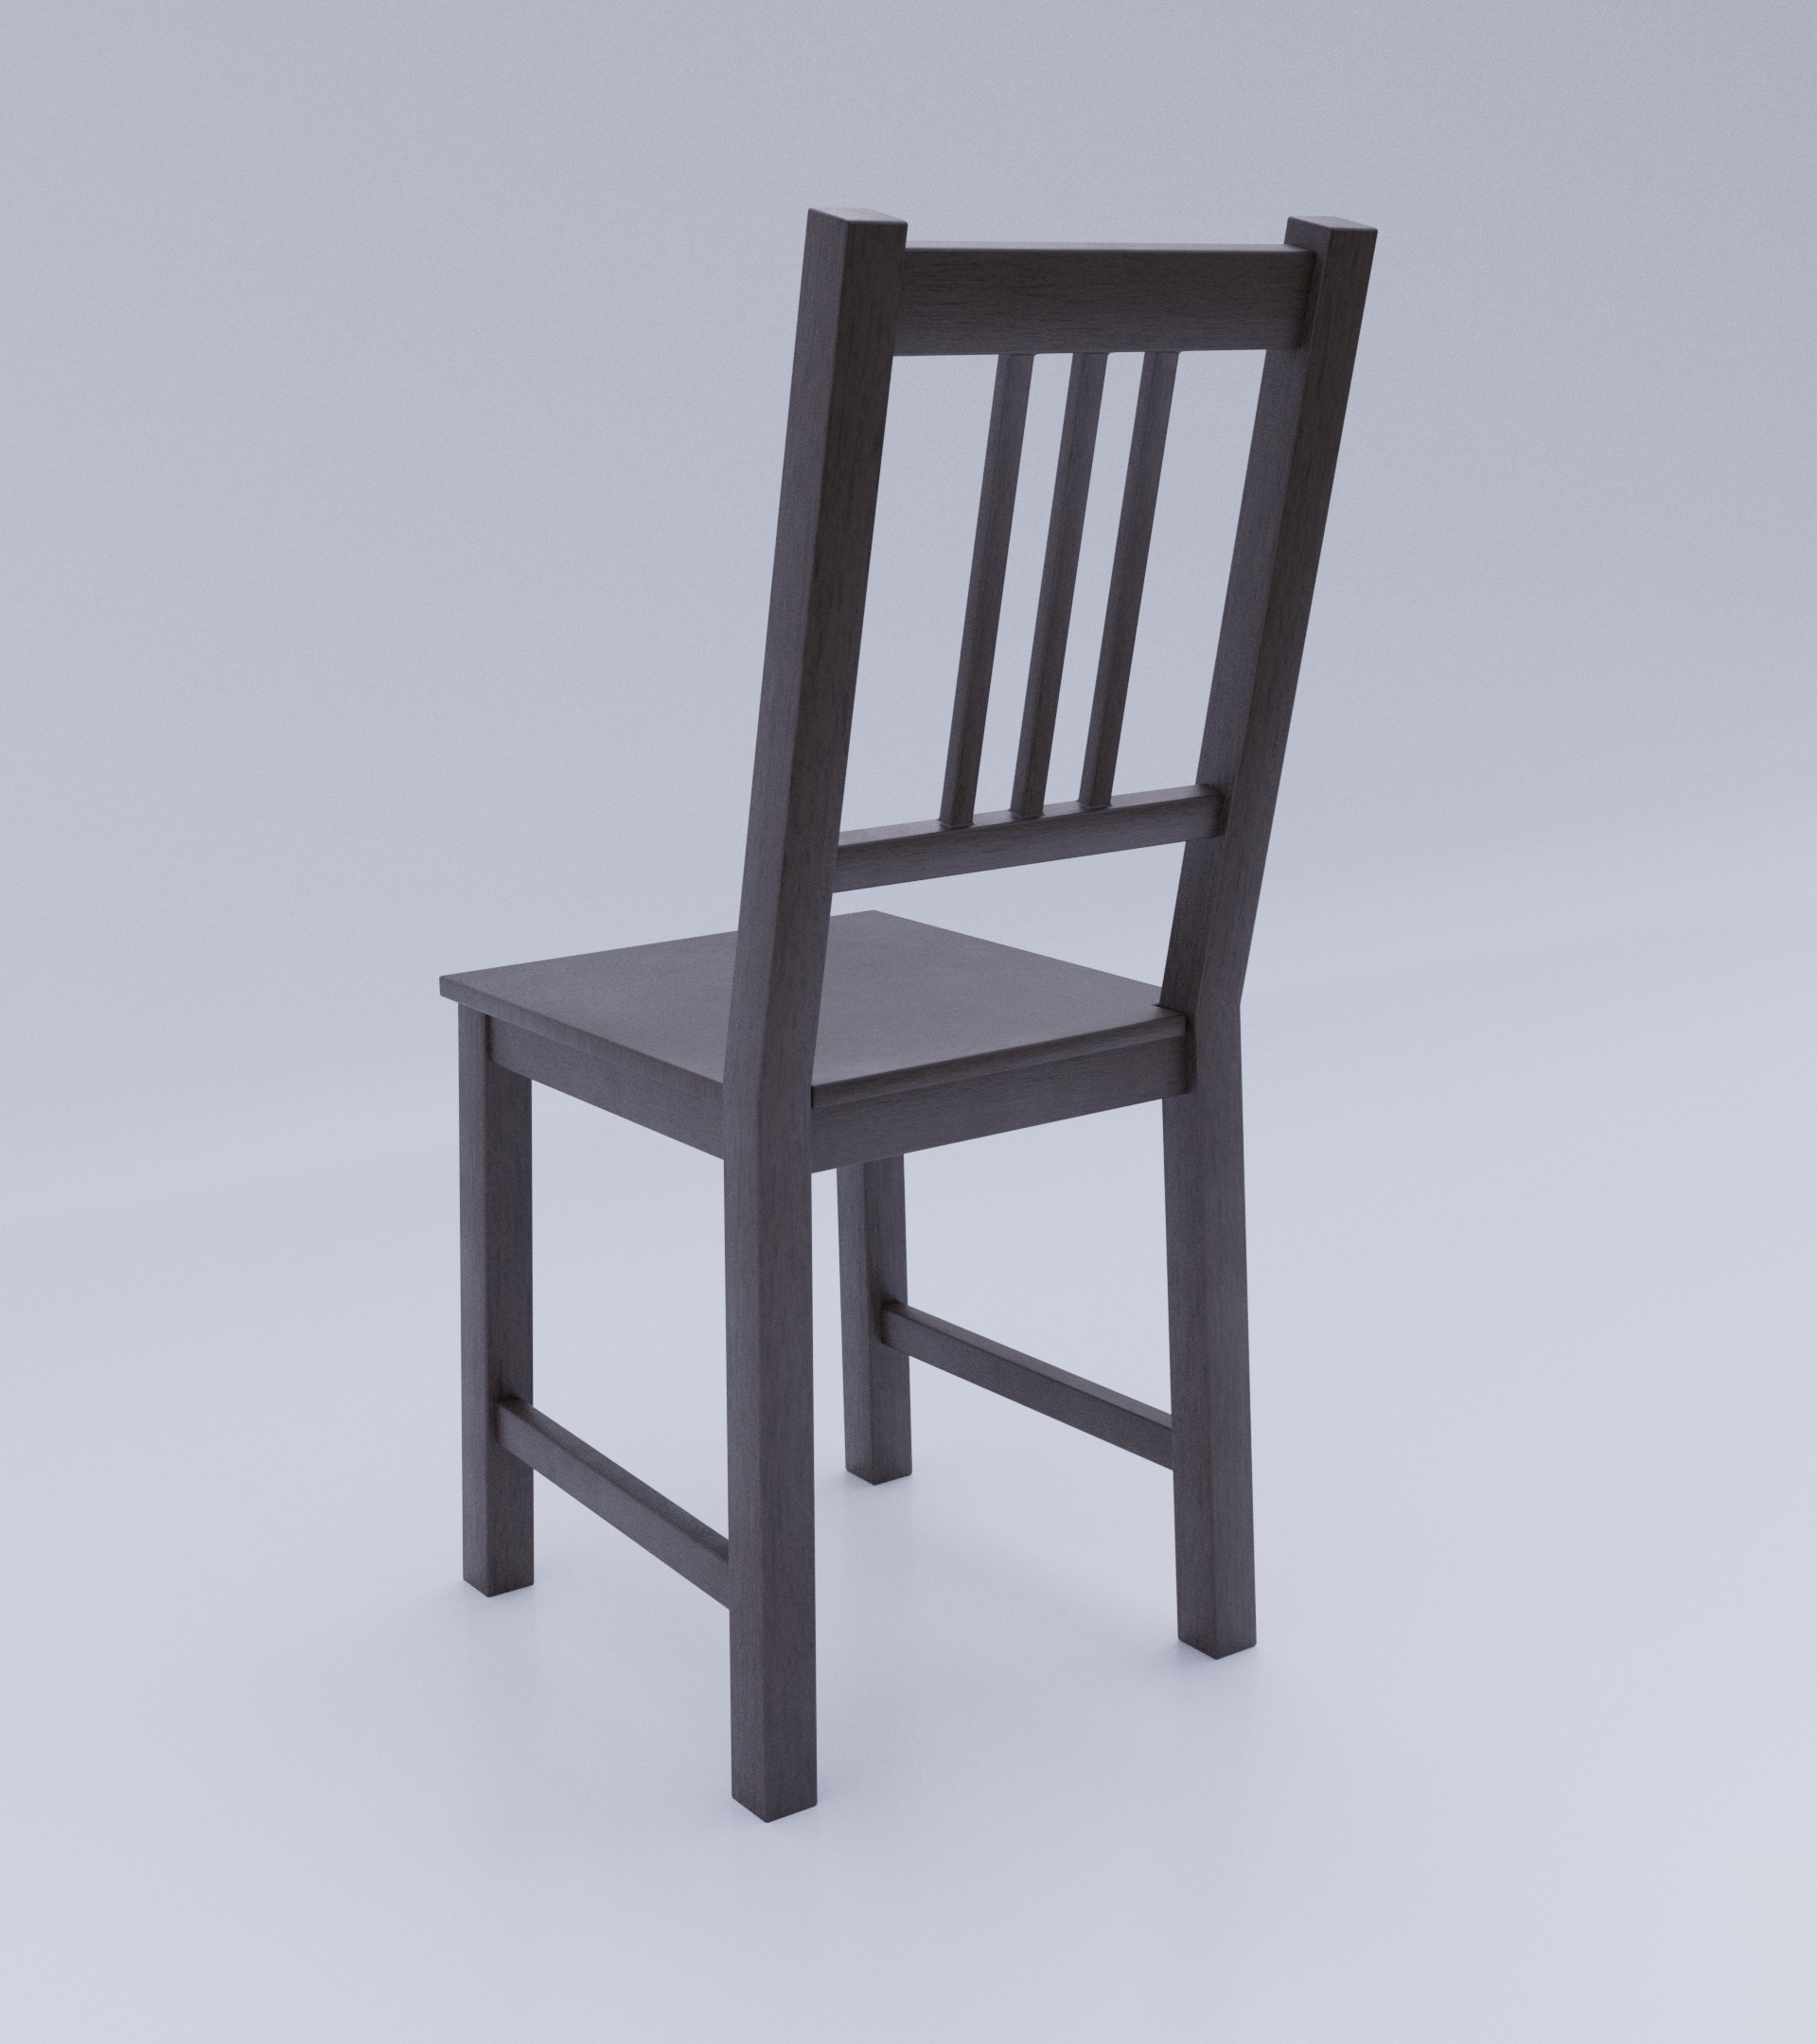 Simple Dark Wood Chair preview image 5